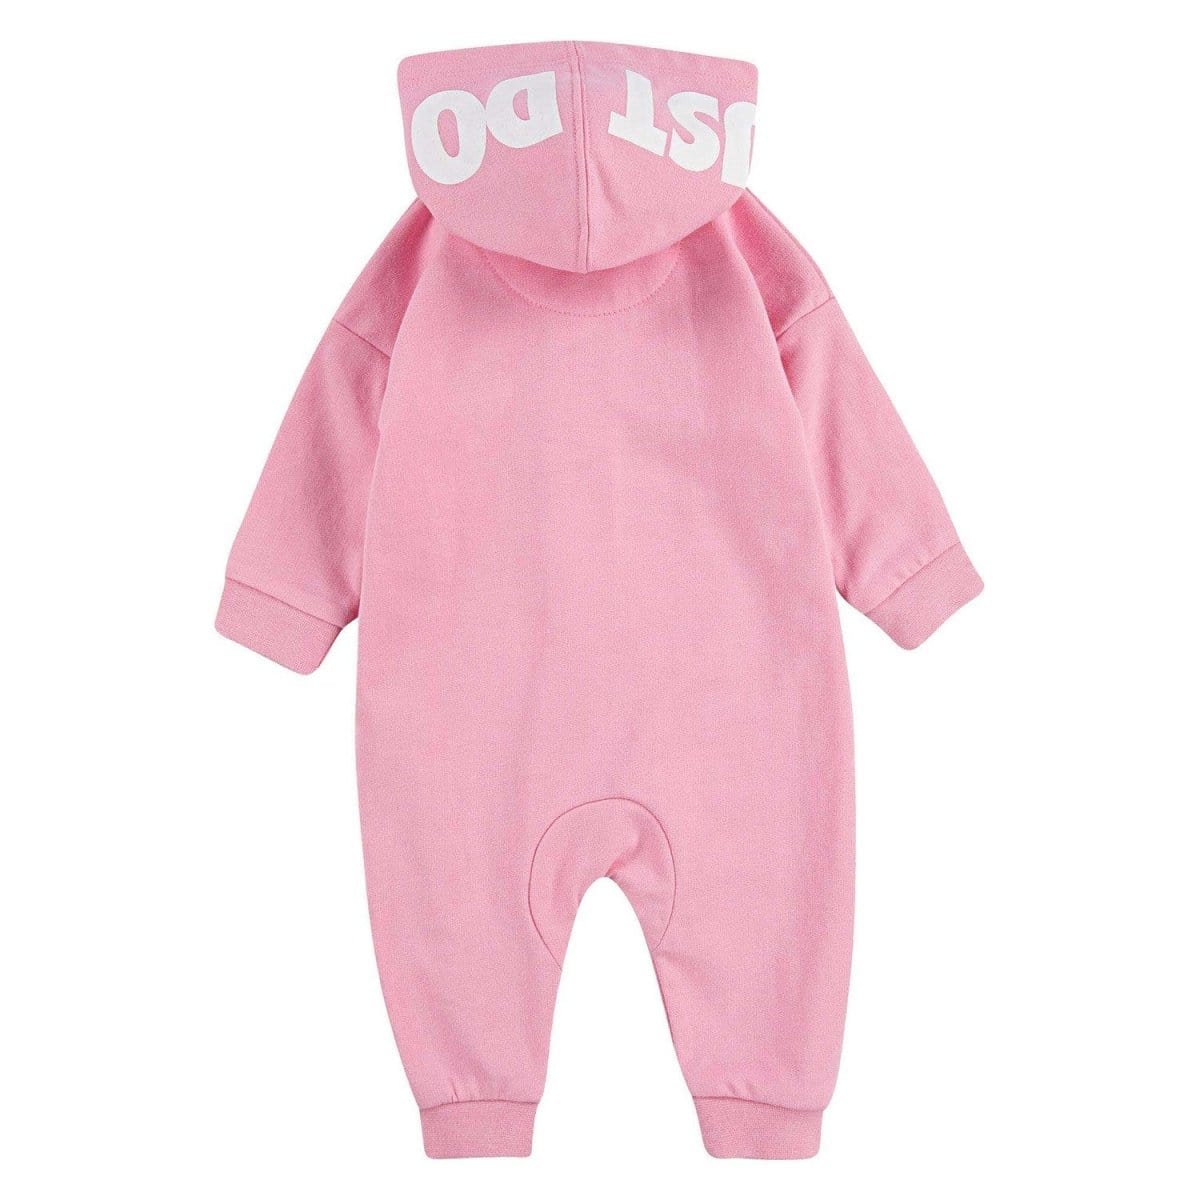 Nike NIKE INFANT'S HOODED PINK COVERALL ONESIE - INSPORT